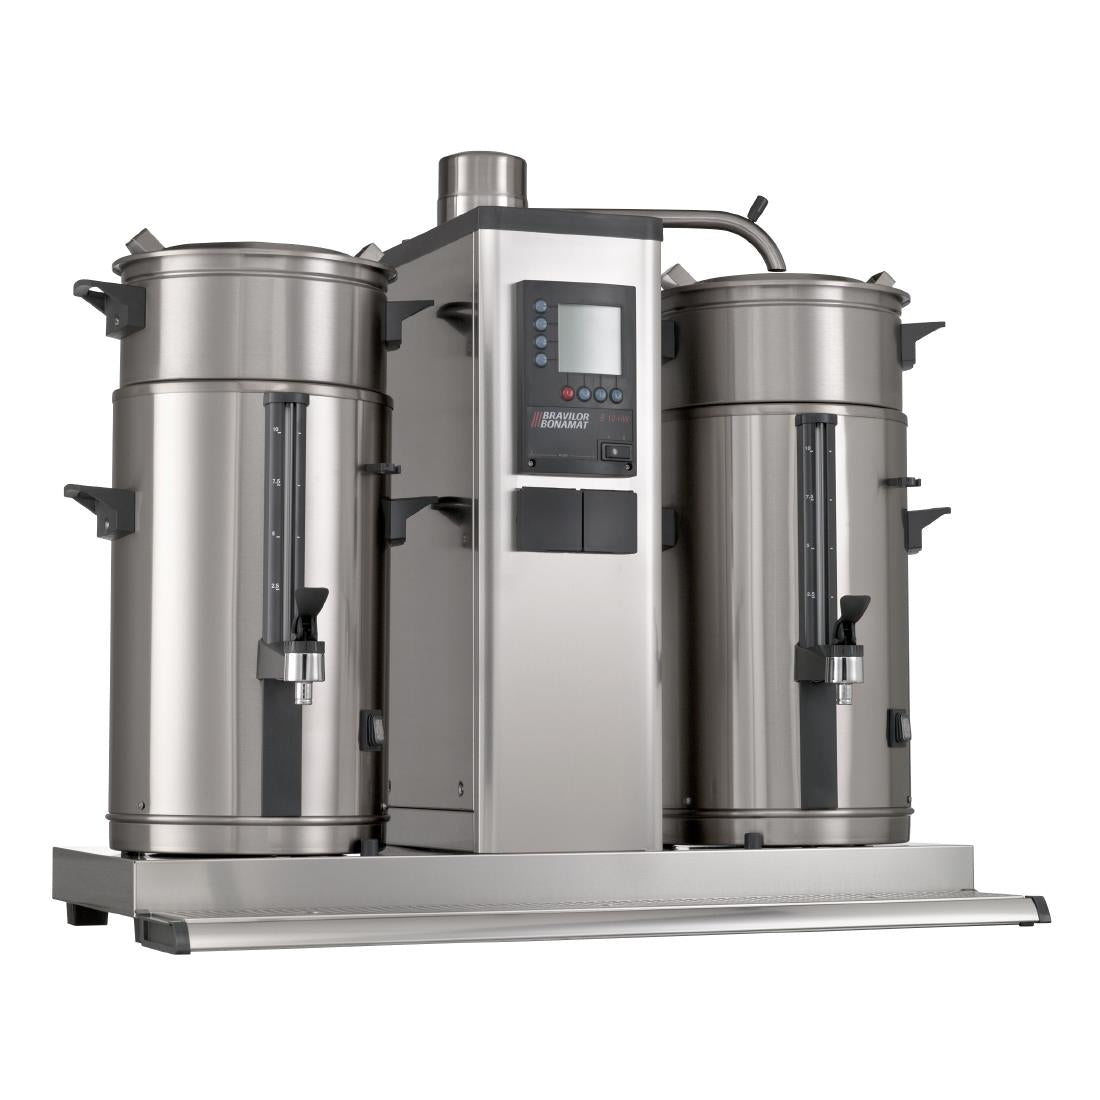 DC678-1P Bravilor B10 Bulk Coffee Brewer with 2x10Ltr Coffee Urns Single Phase JD Catering Equipment Solutions Ltd